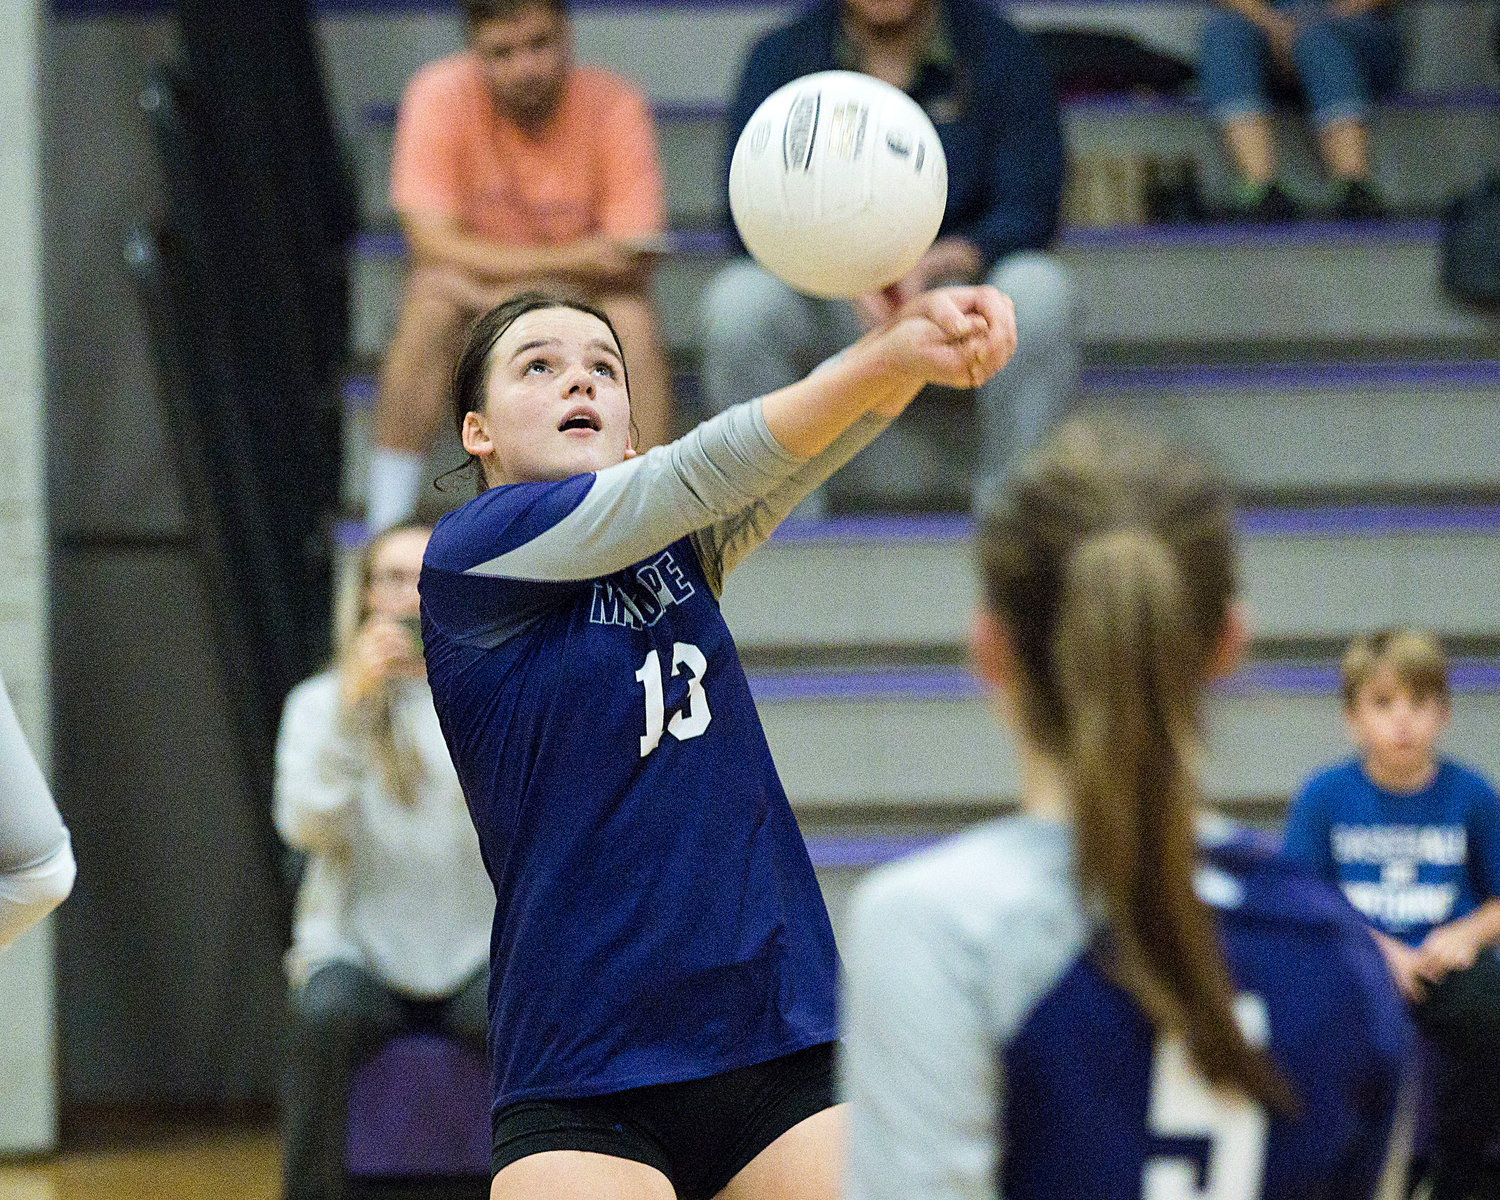 Mia Shaw controls the ball while rallying with Lincoln, Tuesday. 